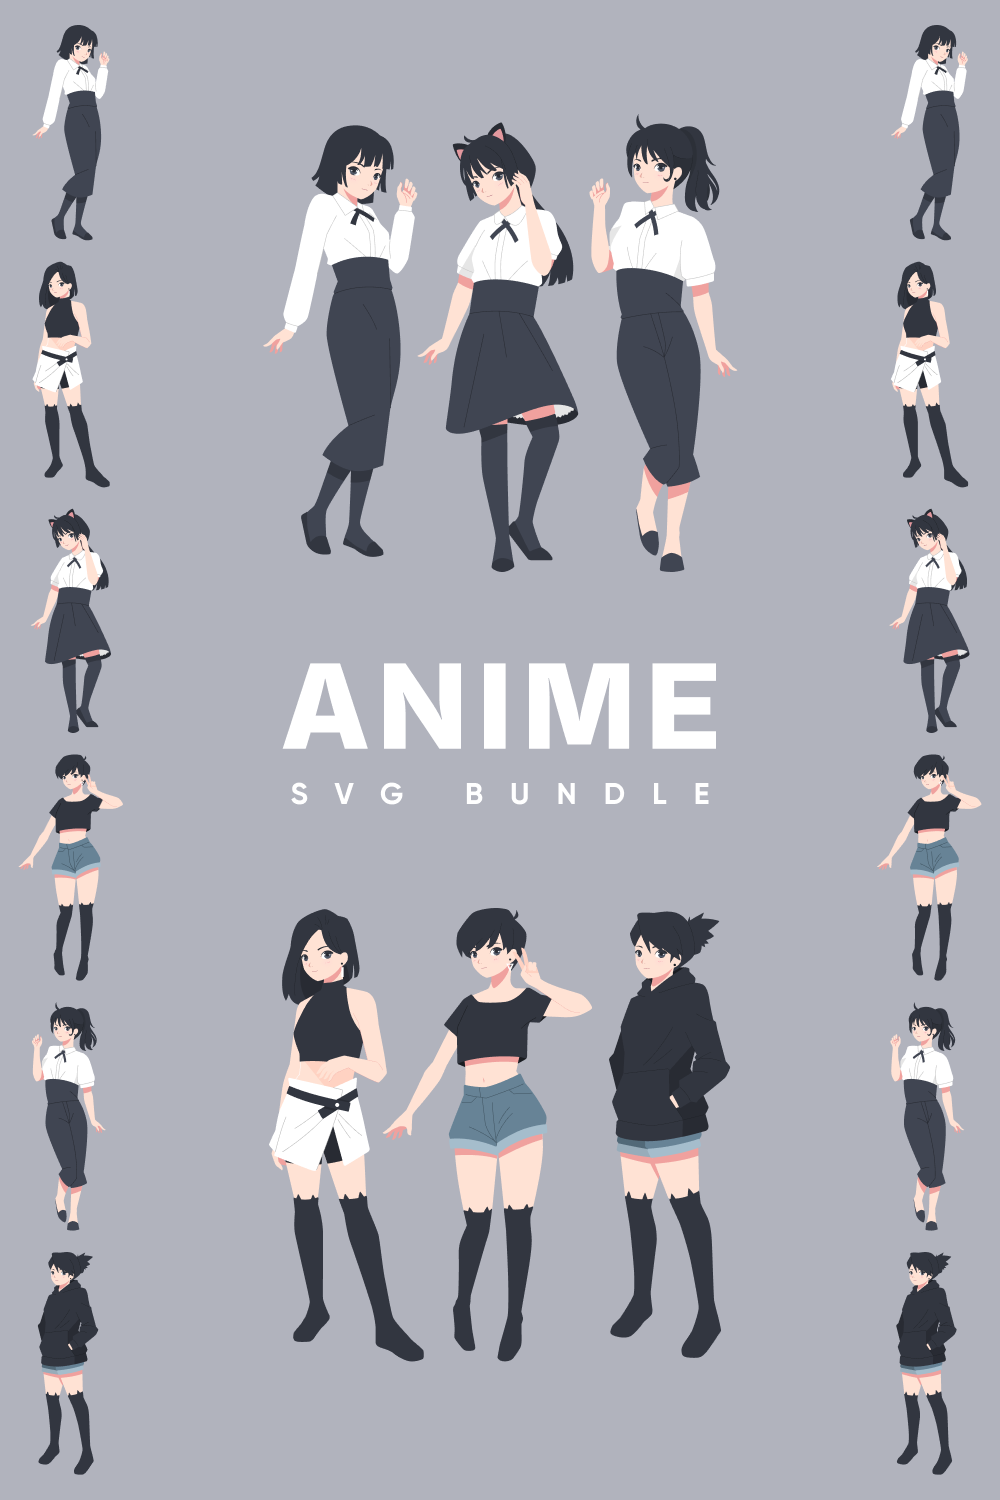 anime svg collection pinterest image.